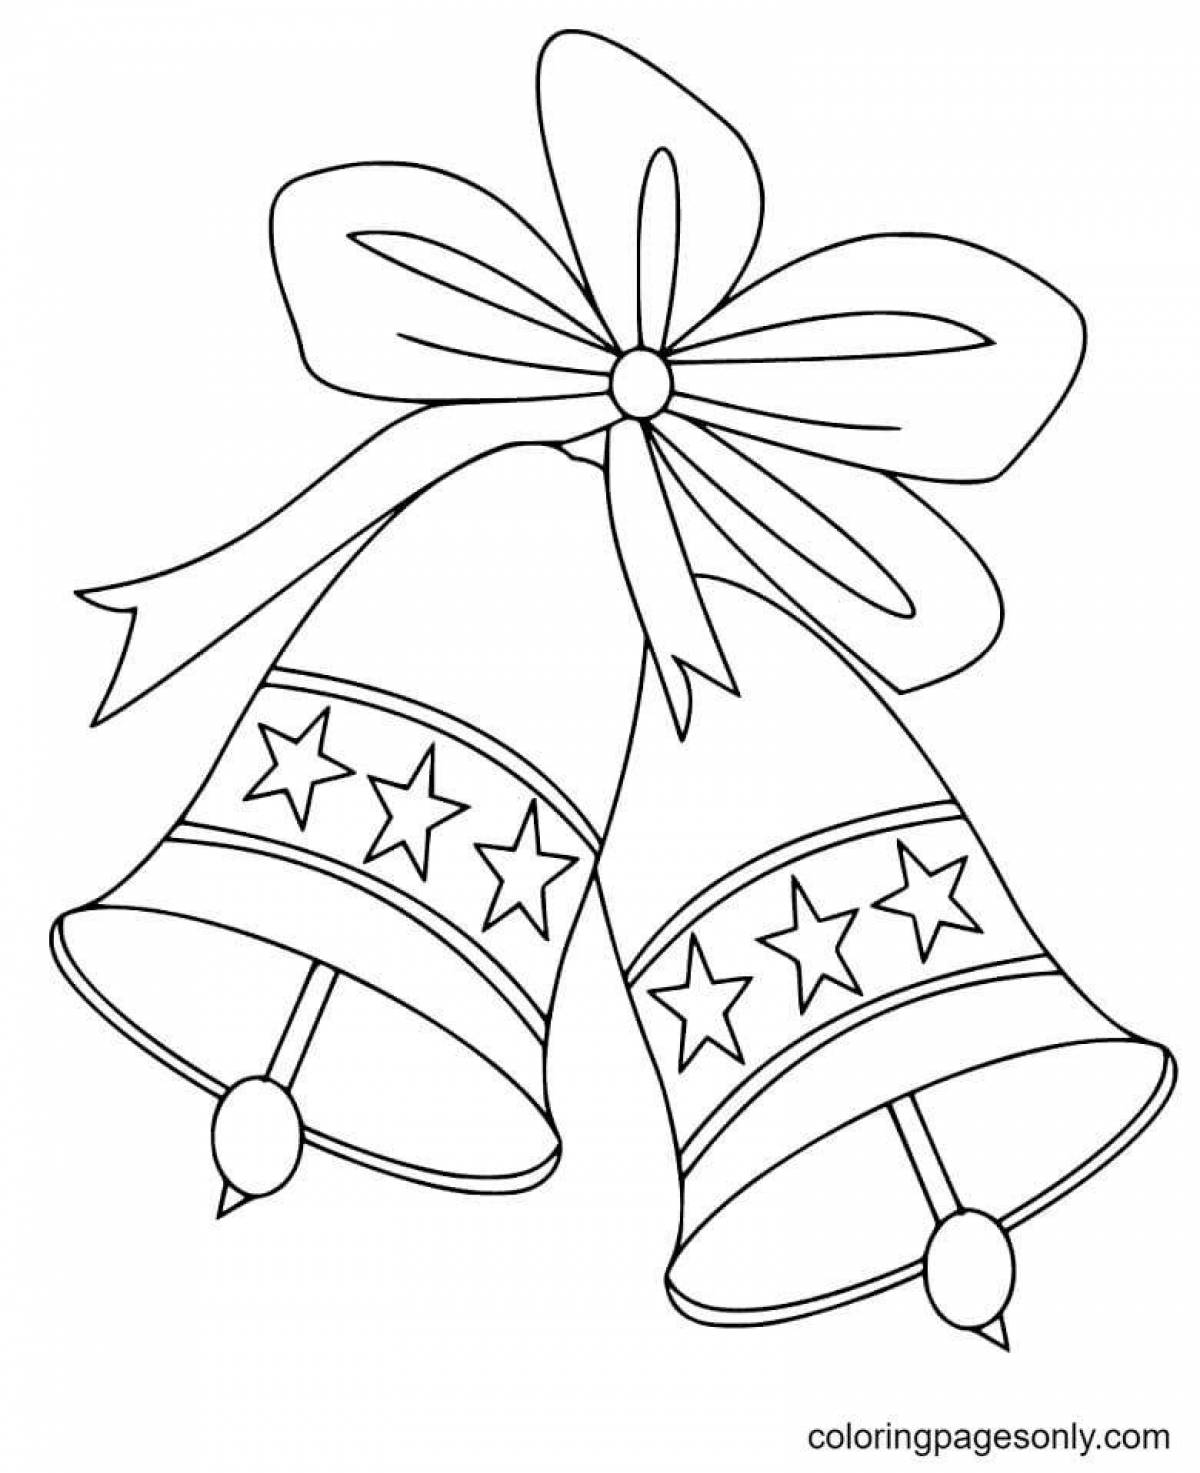 Great bell coloring book for kids